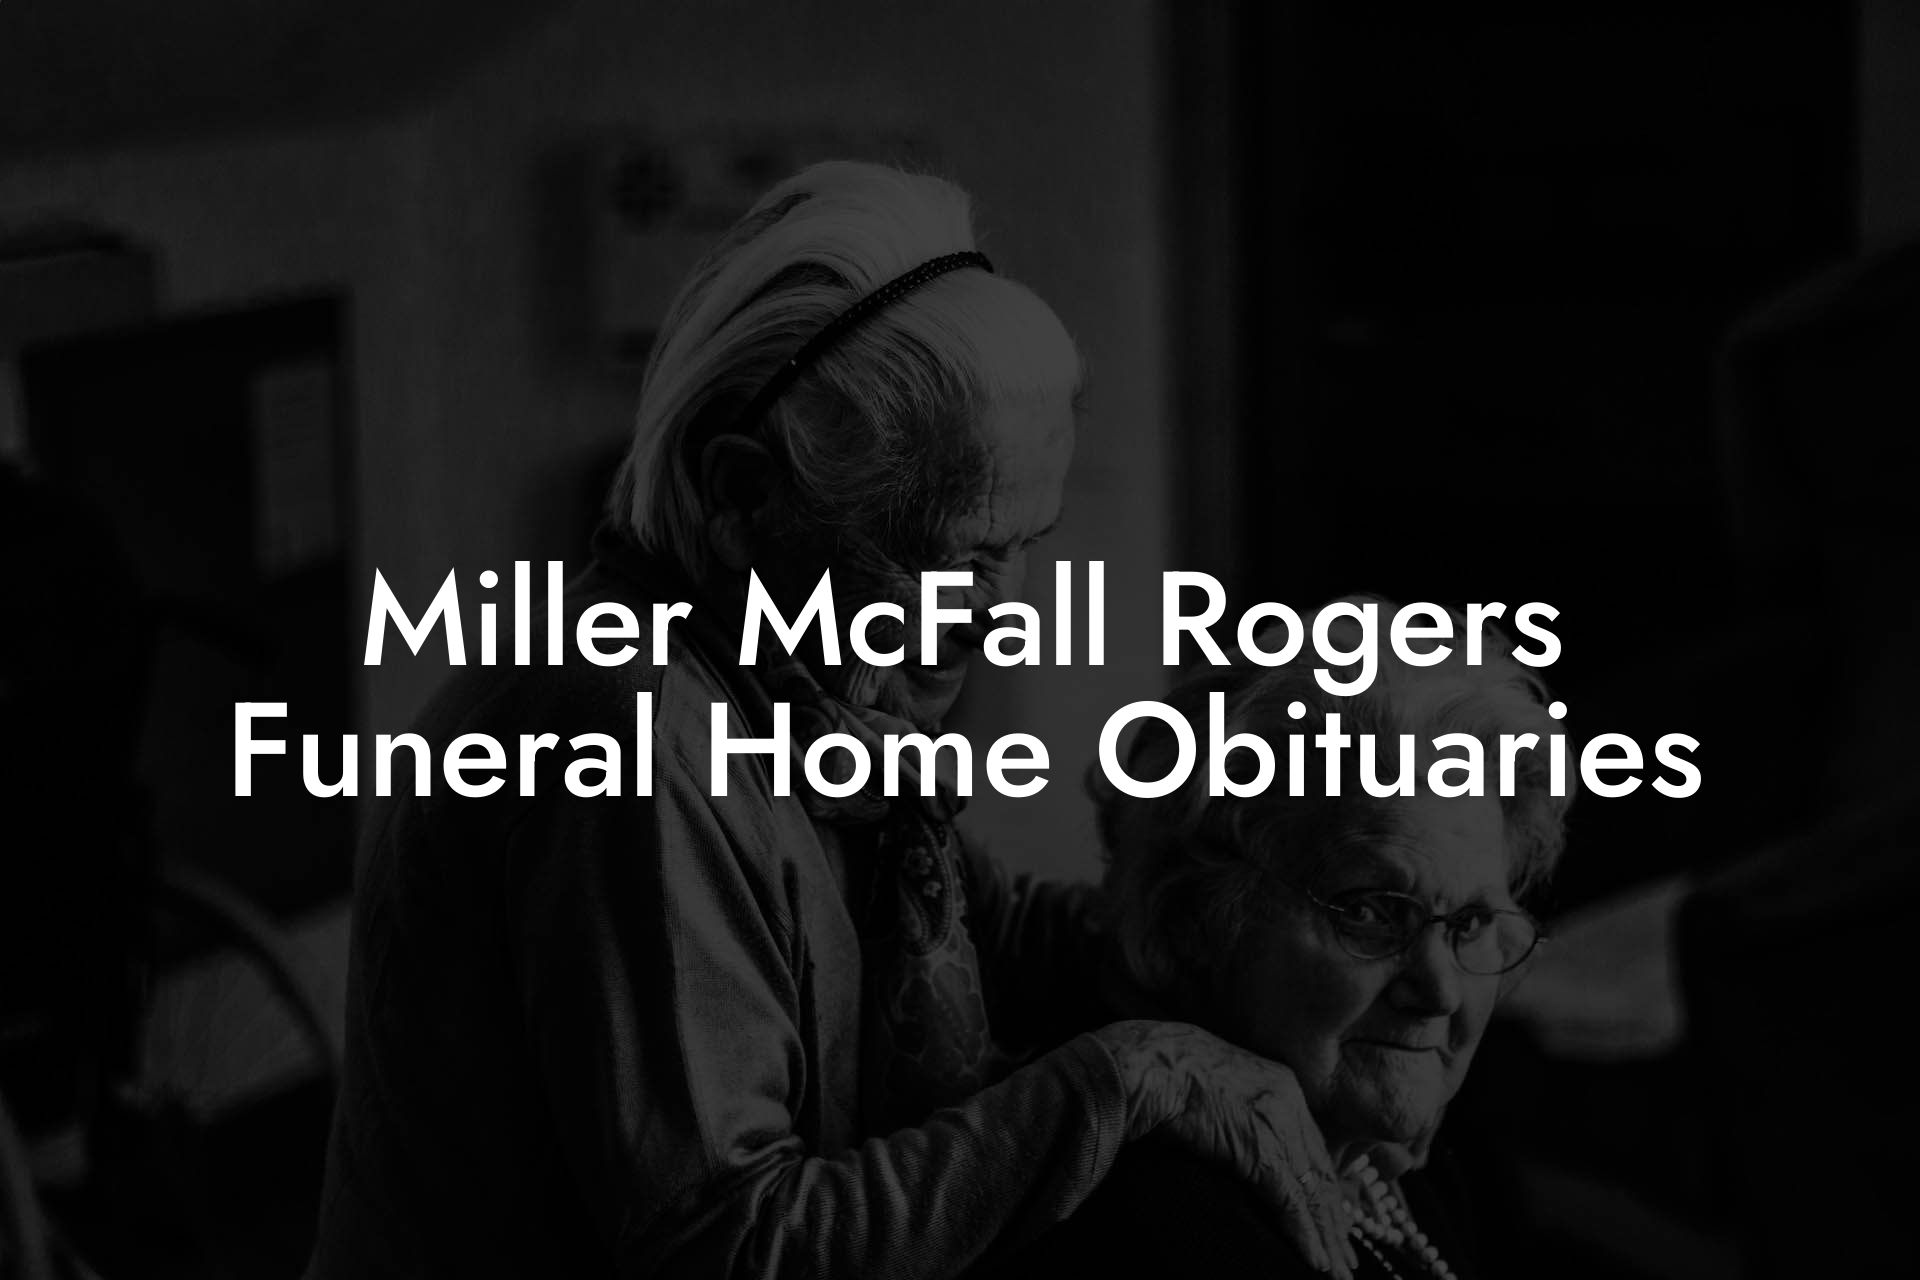 Miller McFall Rogers Funeral Home Obituaries